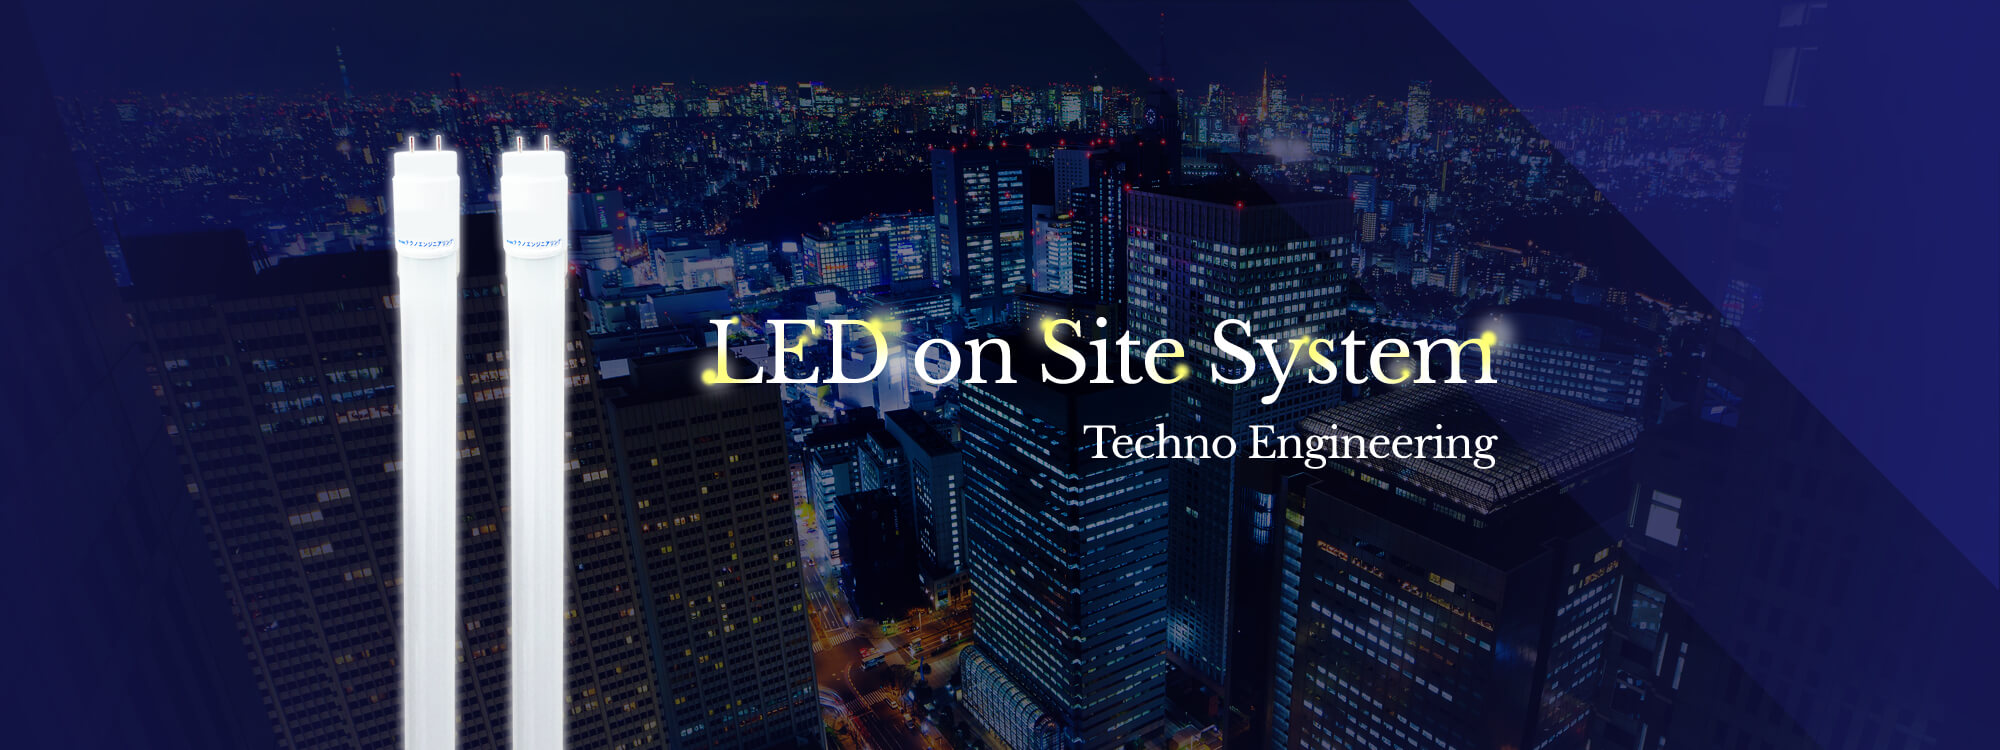 LED on Site System Techno Engineering